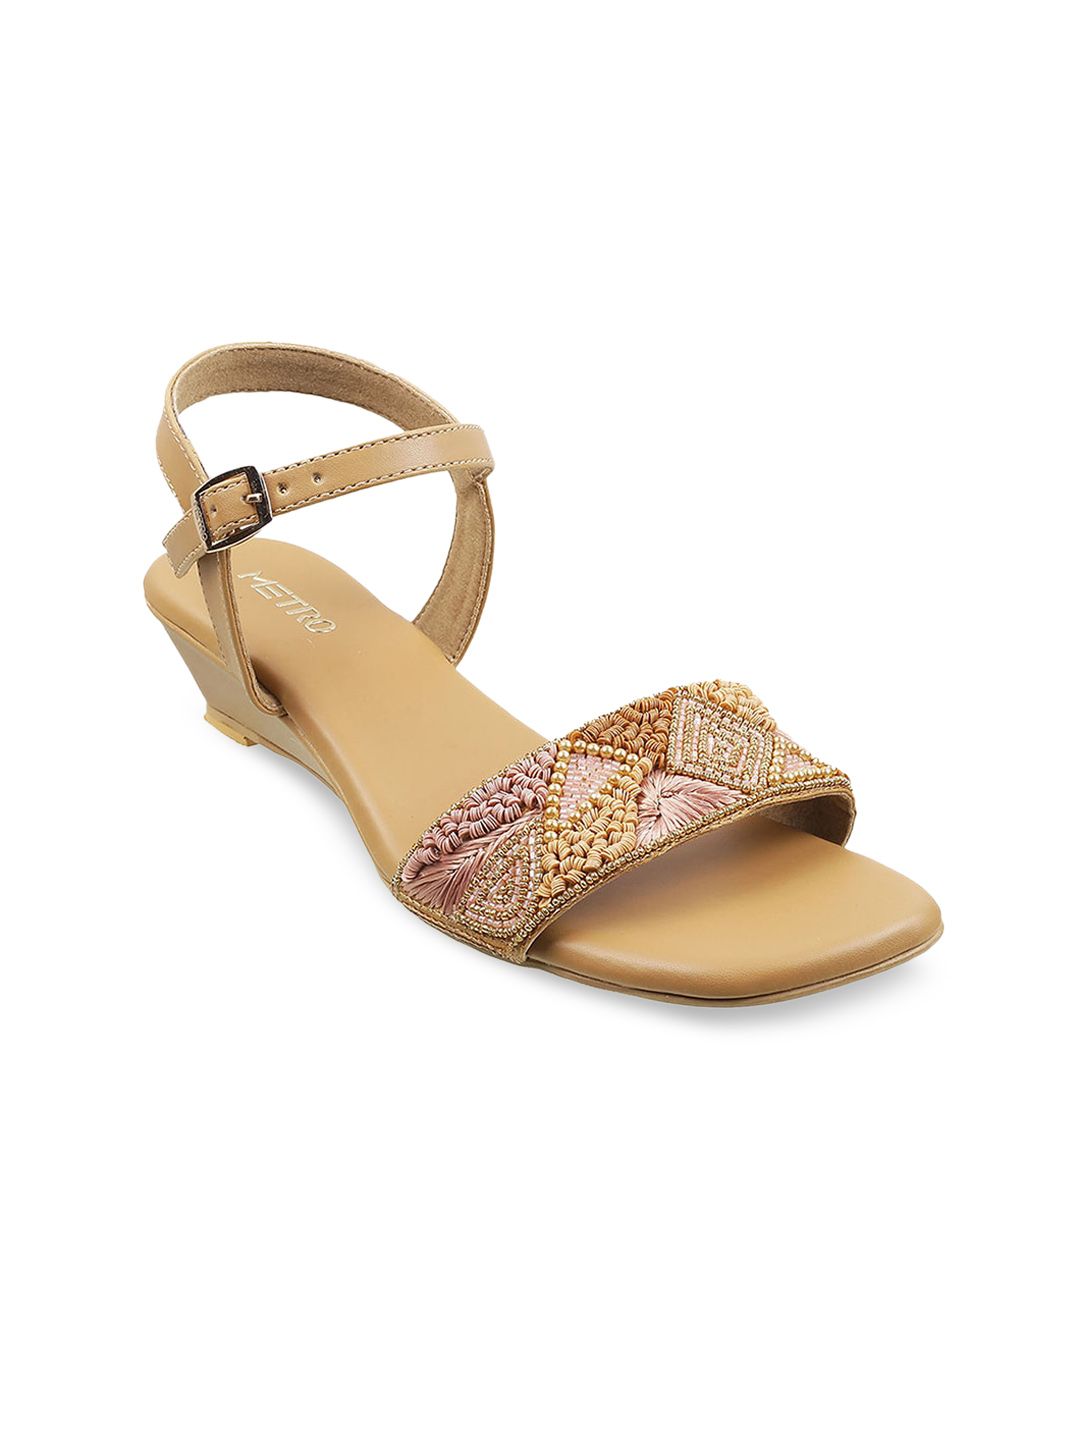 Metro Women Gold-Toned Embellished Wedge Sandals Price in India